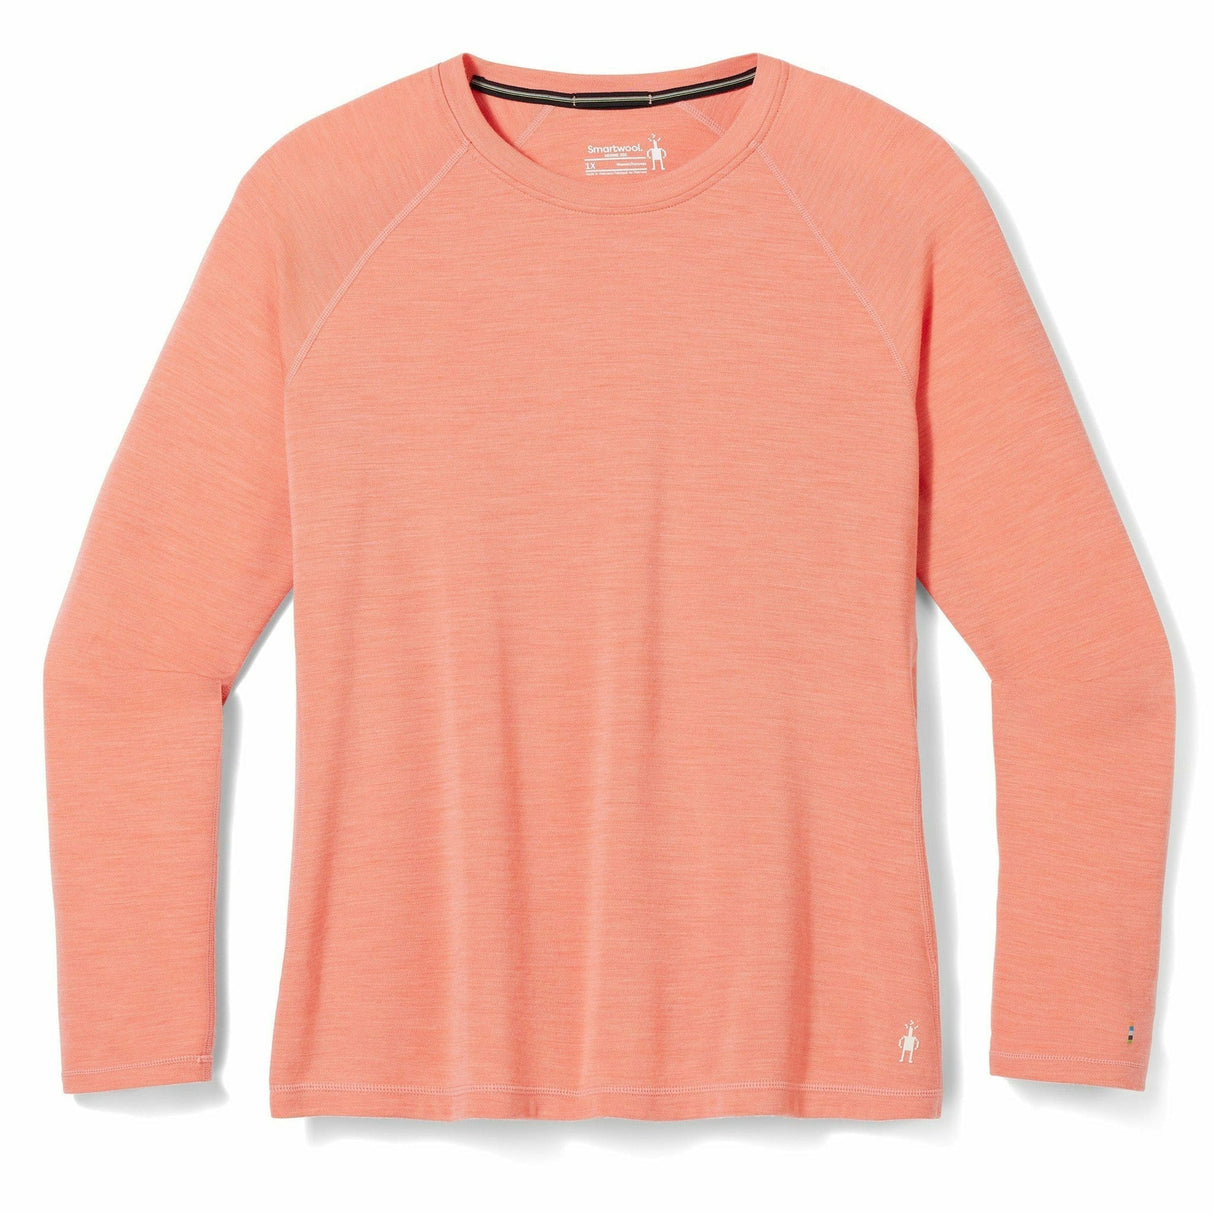 Smartwool Womens Classic Thermal Merino Base Layer Crew Plus  -  1X / Sunset Coral Heather